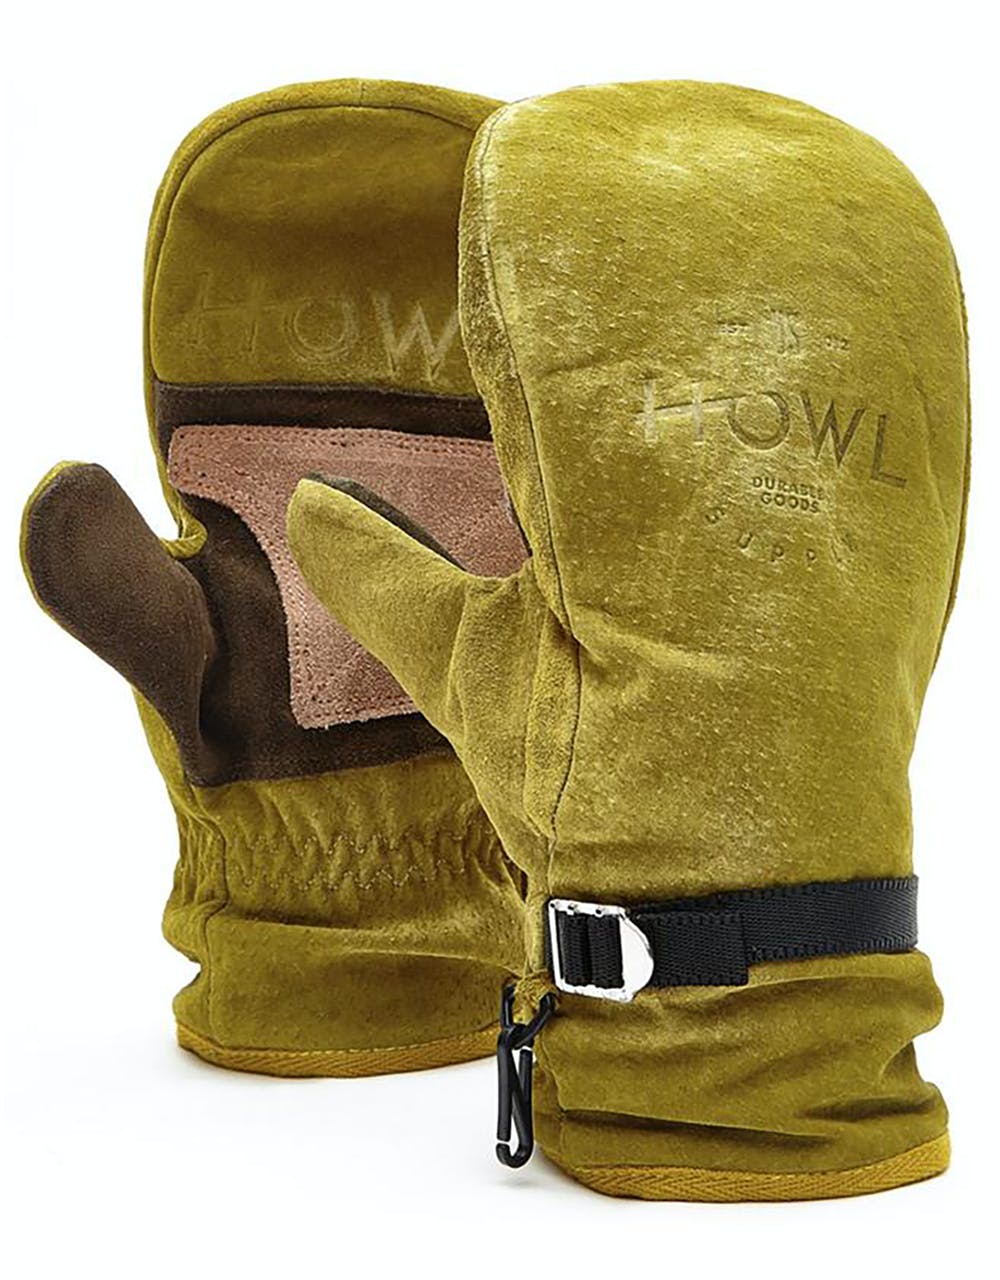 Howl Highland Snowboard Mitts - Gold